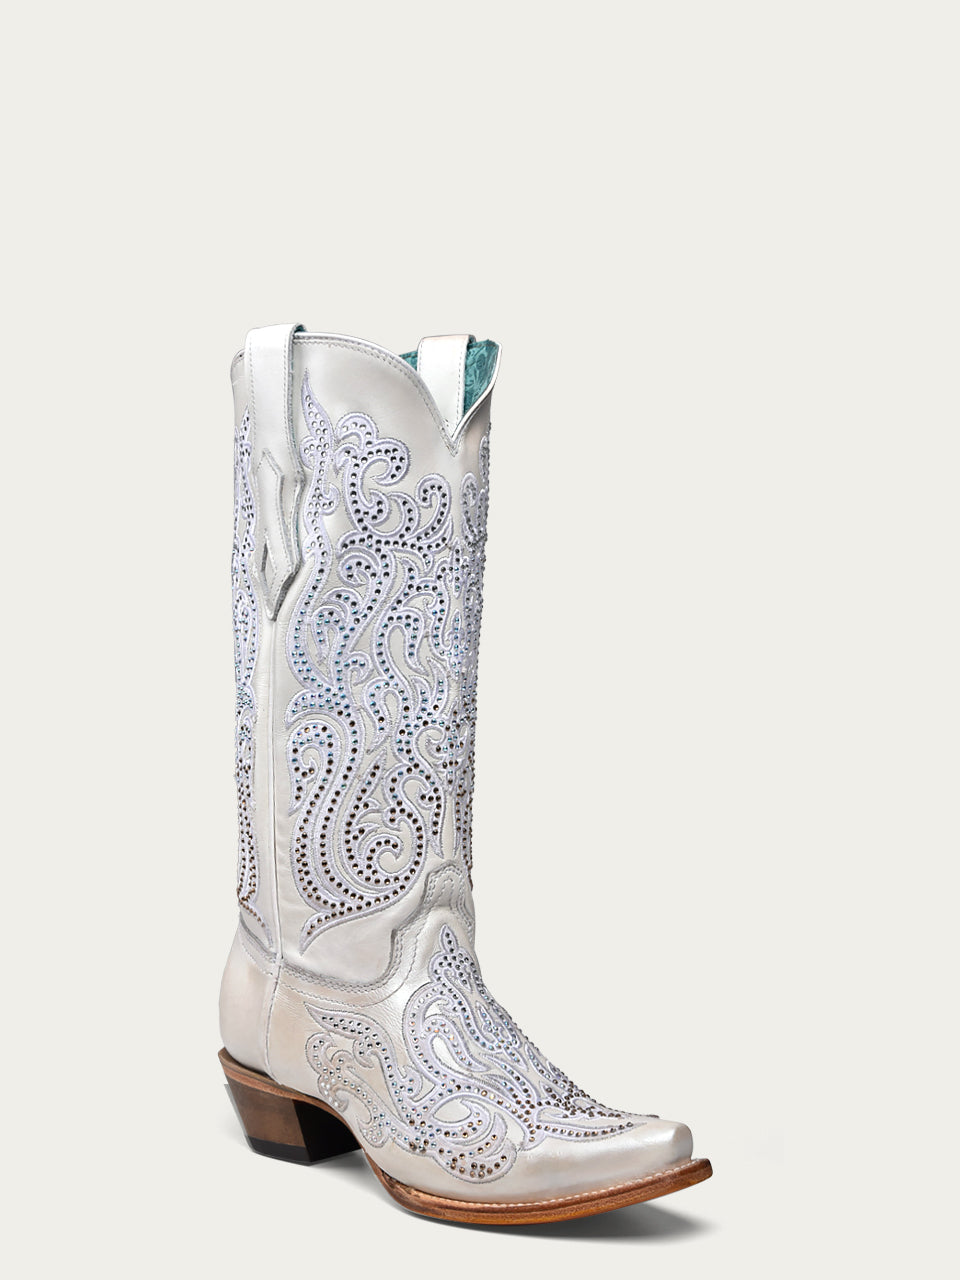 C4103 - WOMEN'S WHITE OVERLAY EMBROIDERY AND CRYSTALS SNIP TOE BOOT